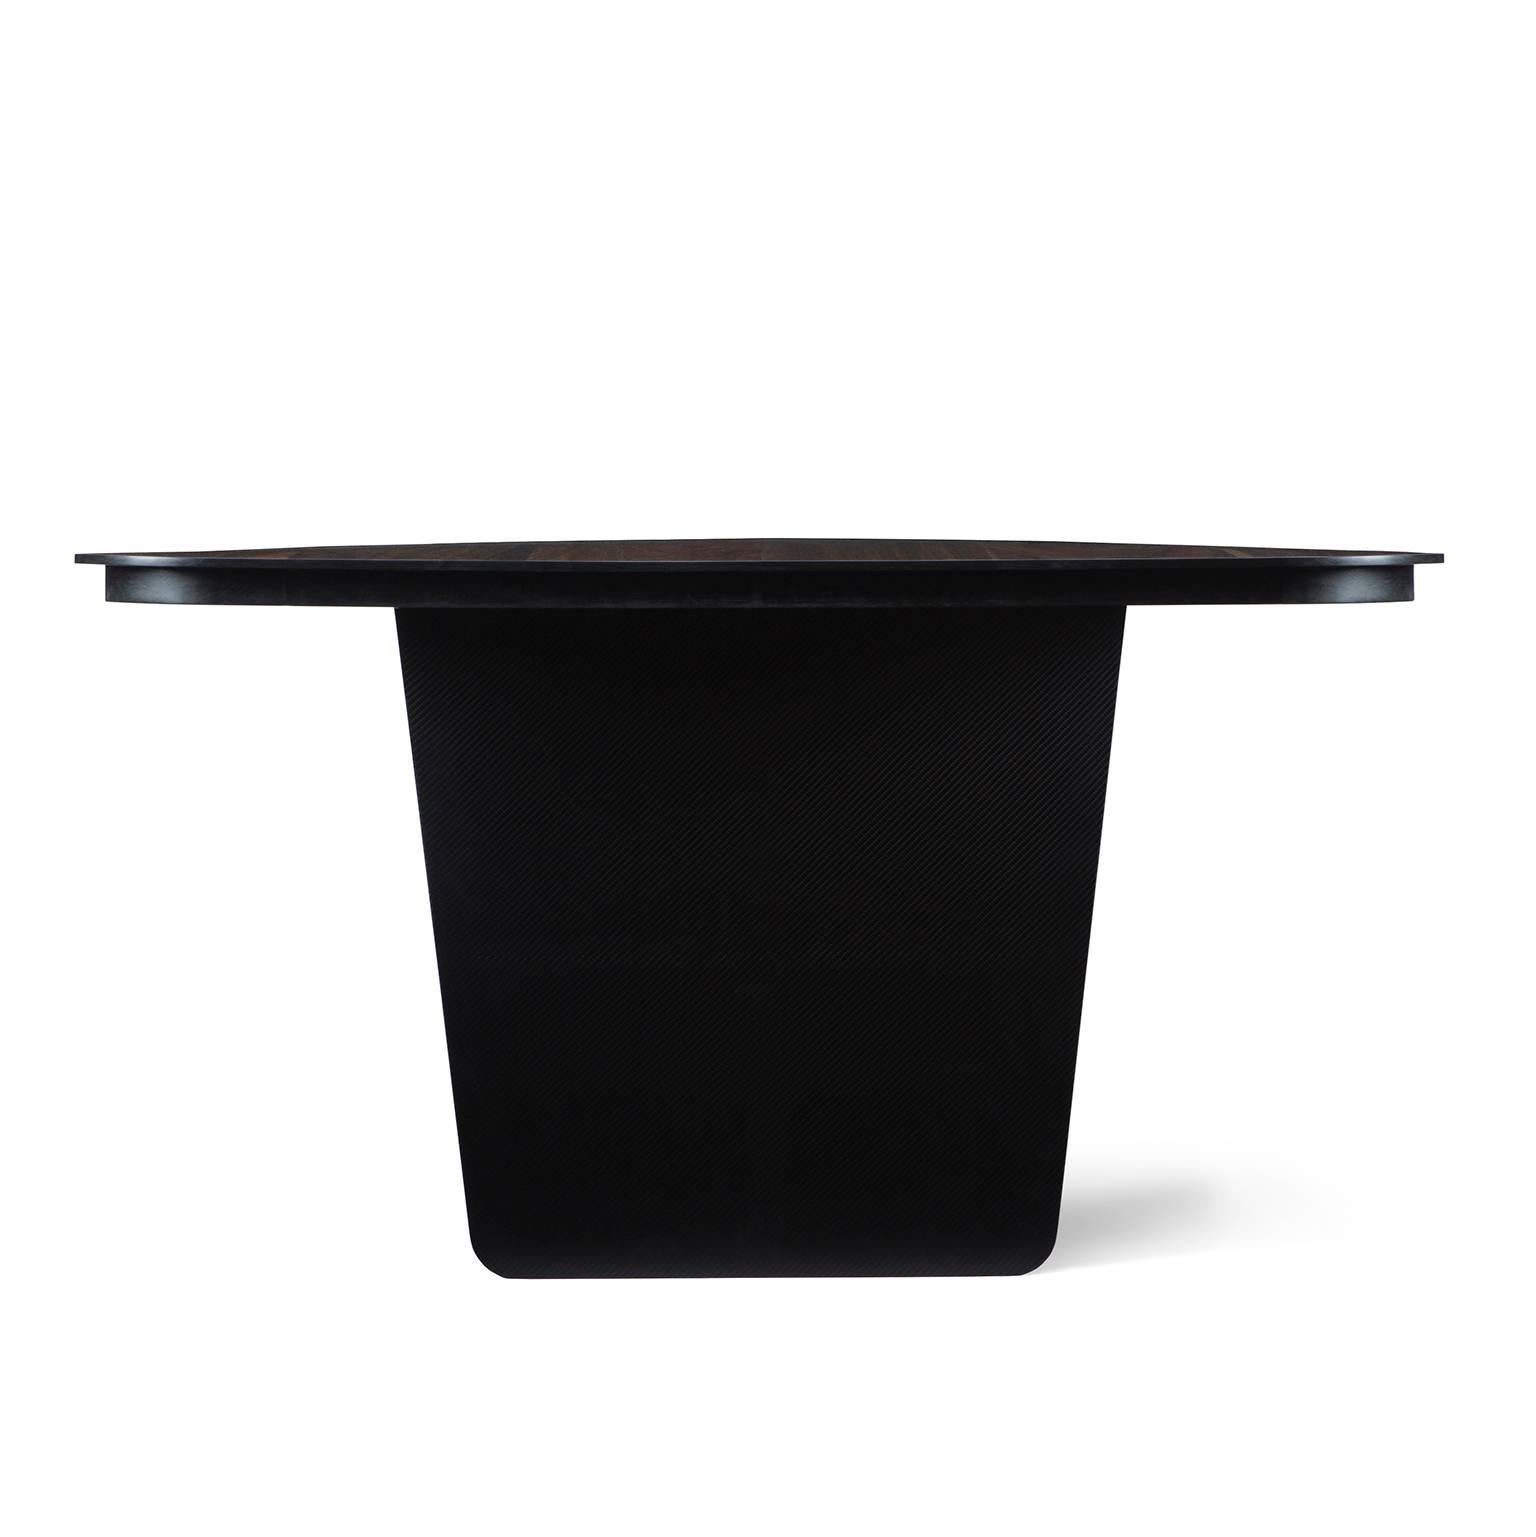 Carbon Claro, lightweight at the sight, robust in the structure. The Carbon Claro table features a precious solid charred claro walnut combined top with thin carbon legs in different color finishes. The two elements connect seamlessly in a